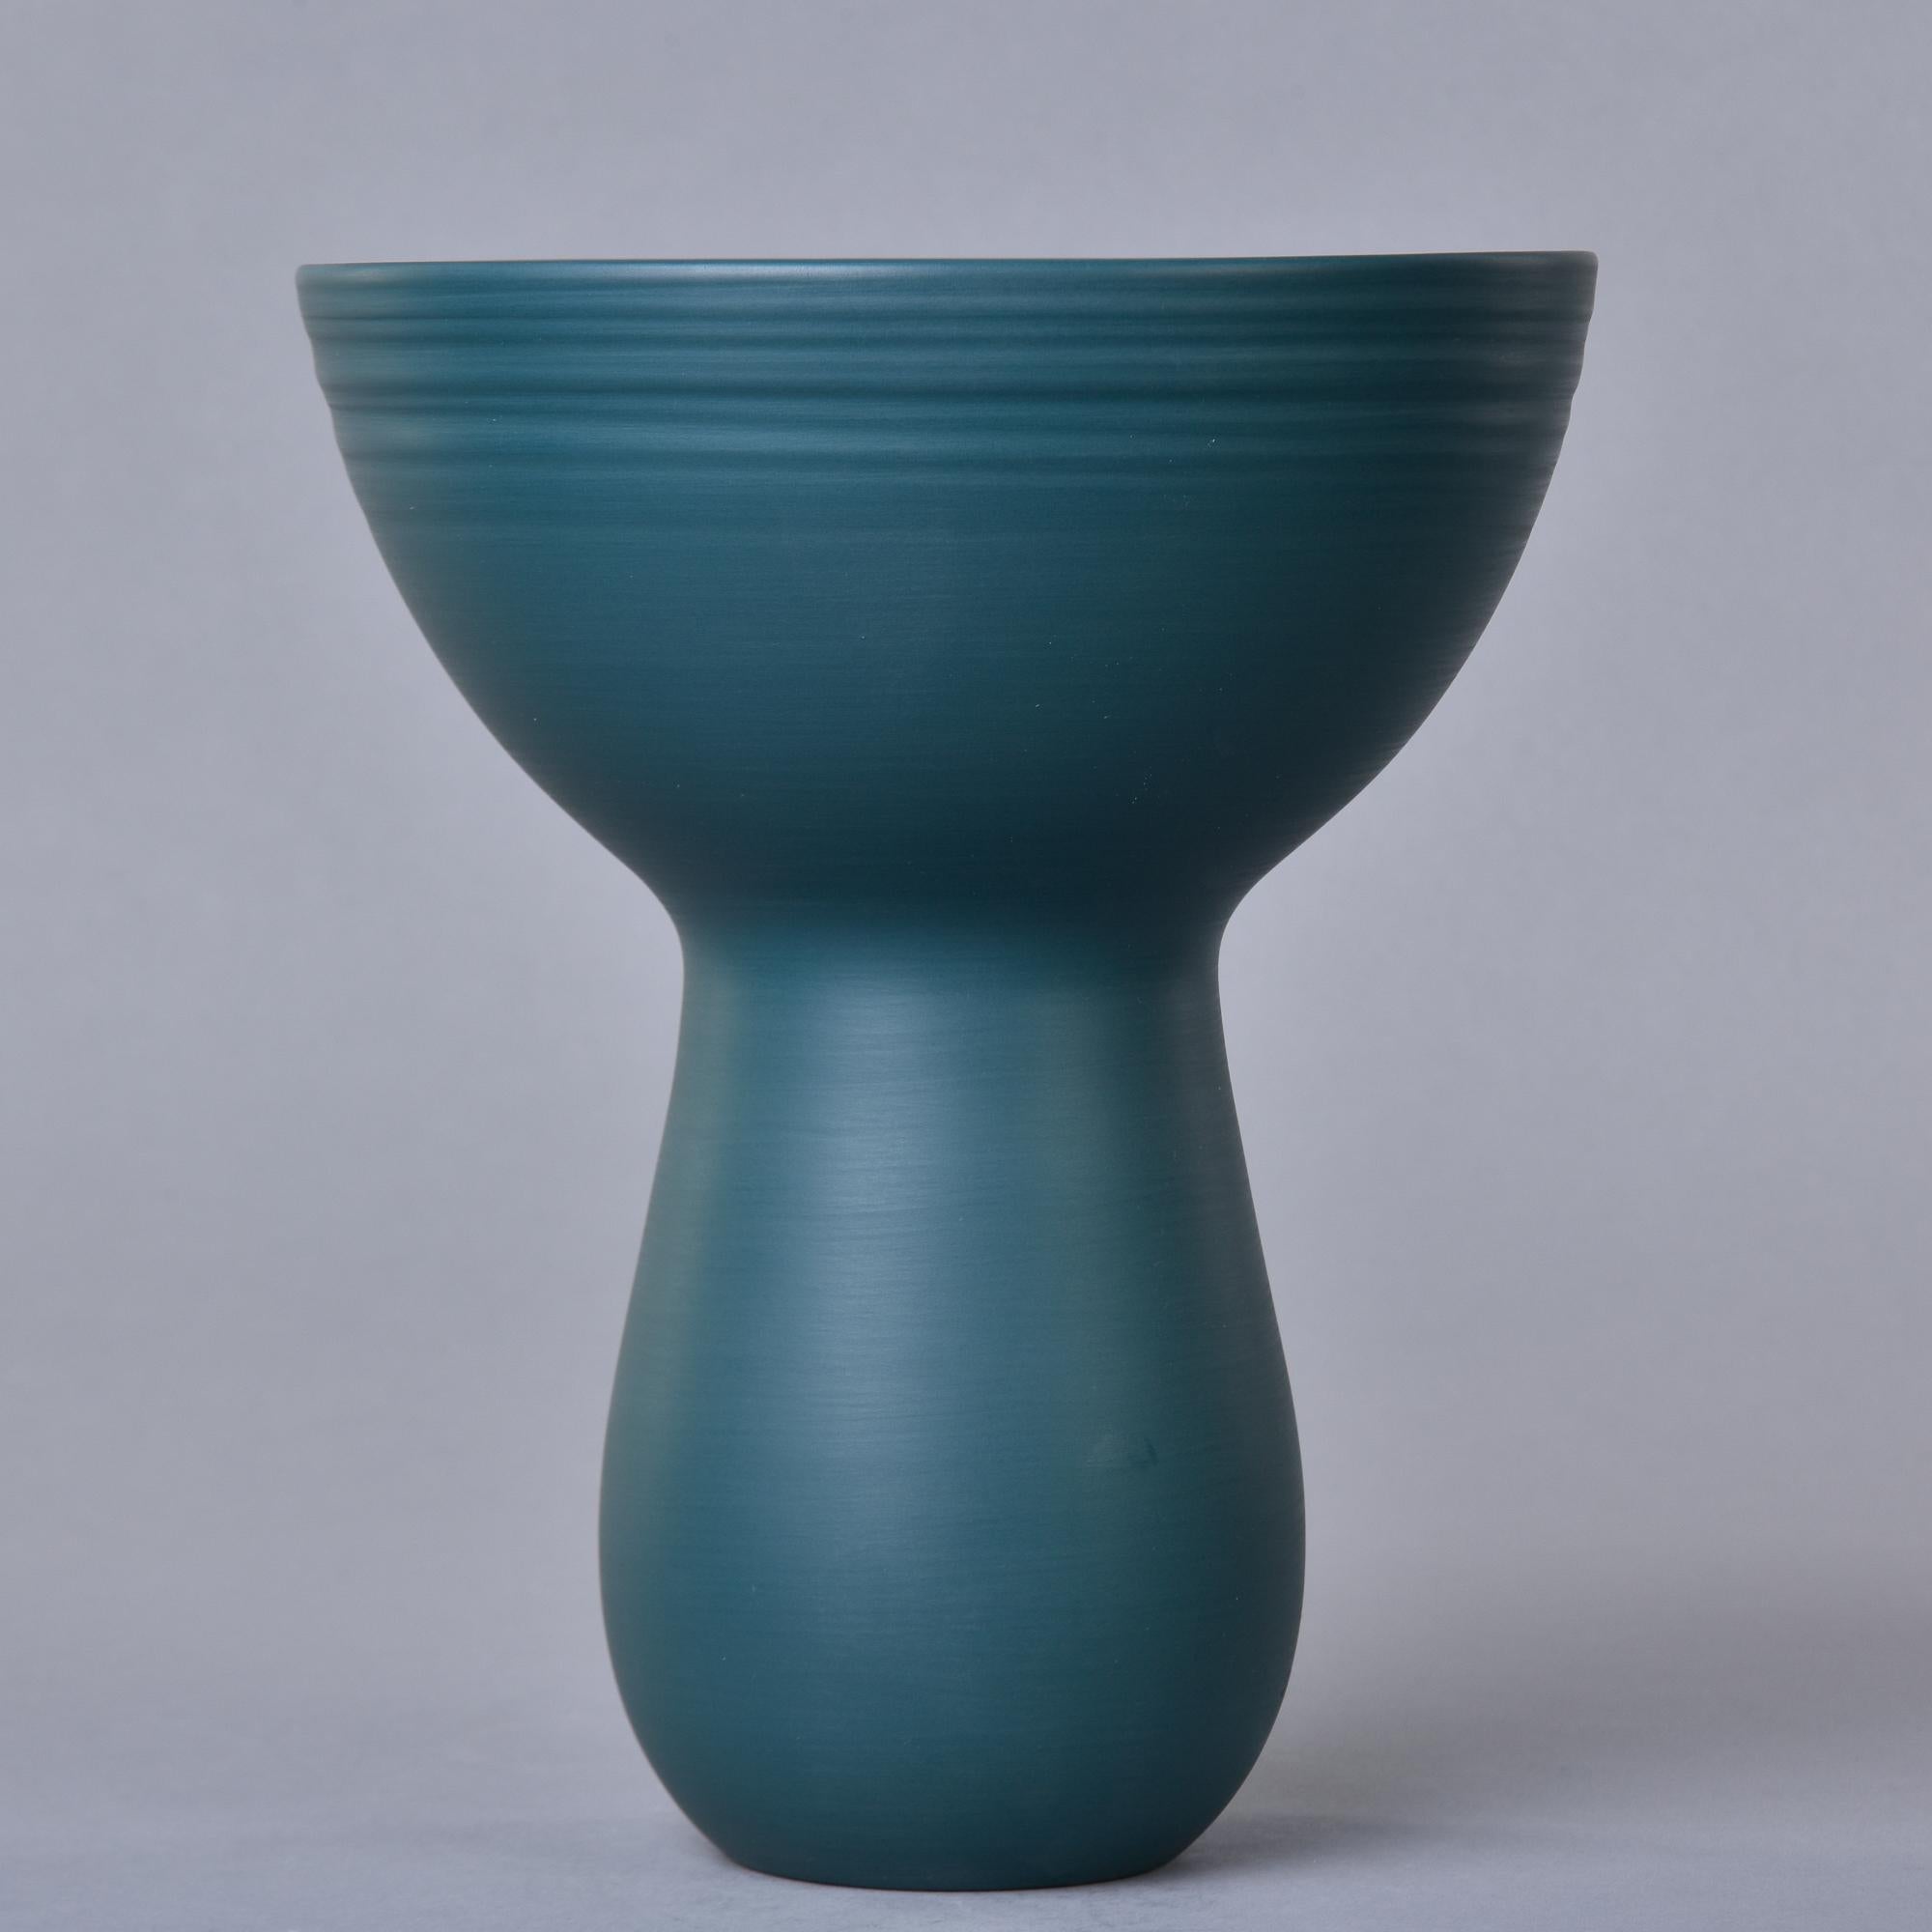 New and made in Italy by Rina Menardi, this bouquet vase stands 10” tall. This finely crafted pottery has a saturated, matte teal green glaze inside and out, thin walls, and a sculptural shape with a narrow, rounded base and bowl-like rim. Signed by